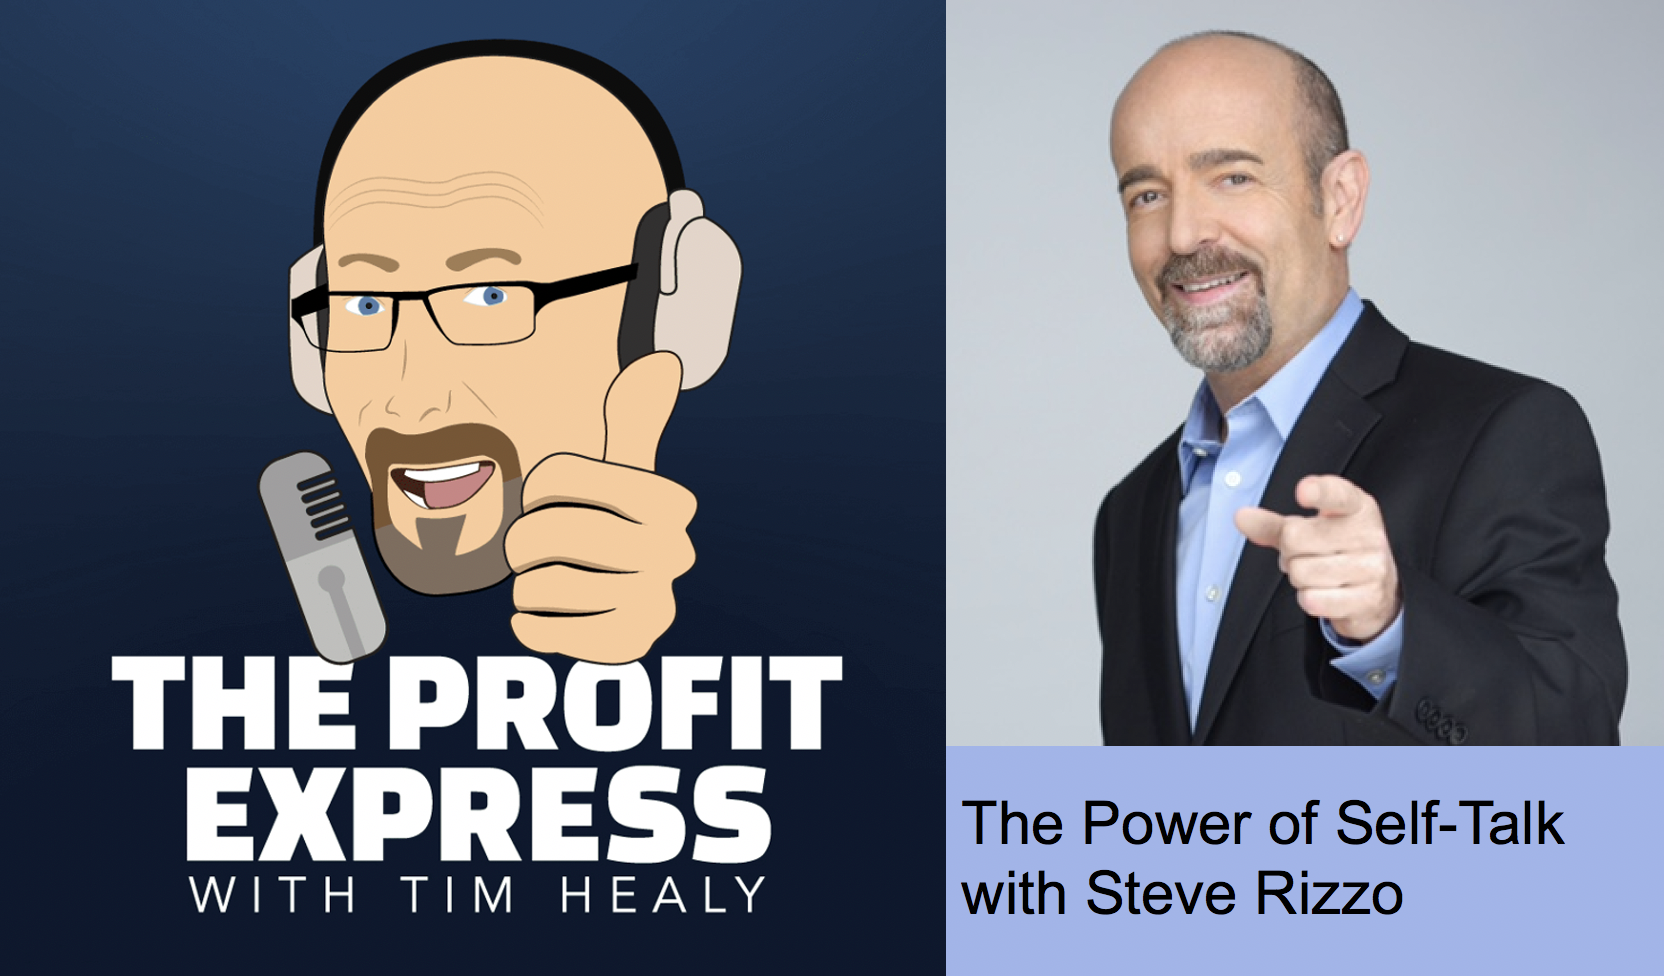 The Power of Self-Talk with Steve Rizzo